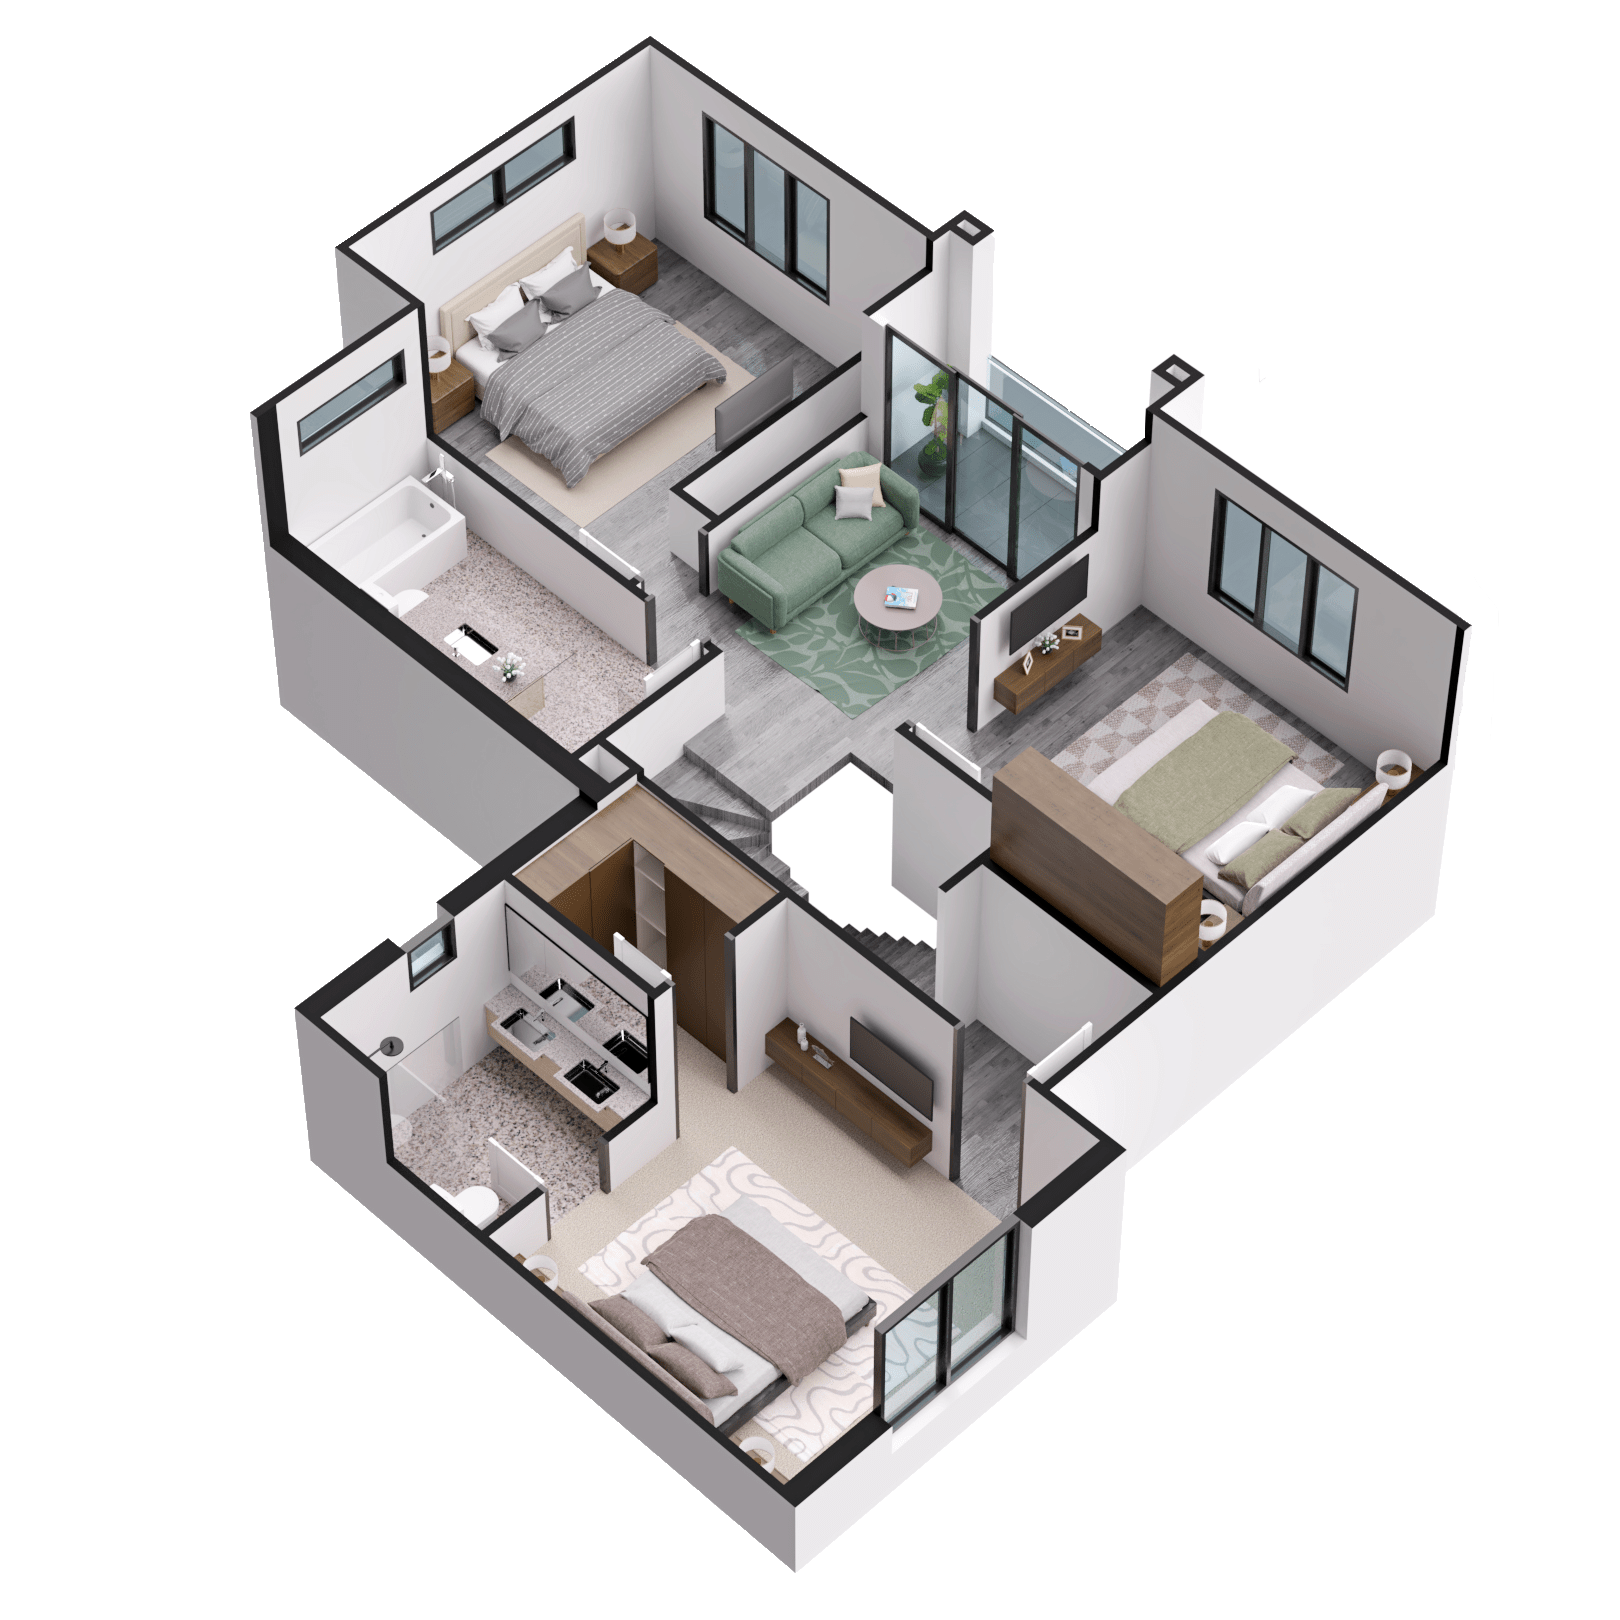 House Floor plan Design by Glam Architecture on Dribbble